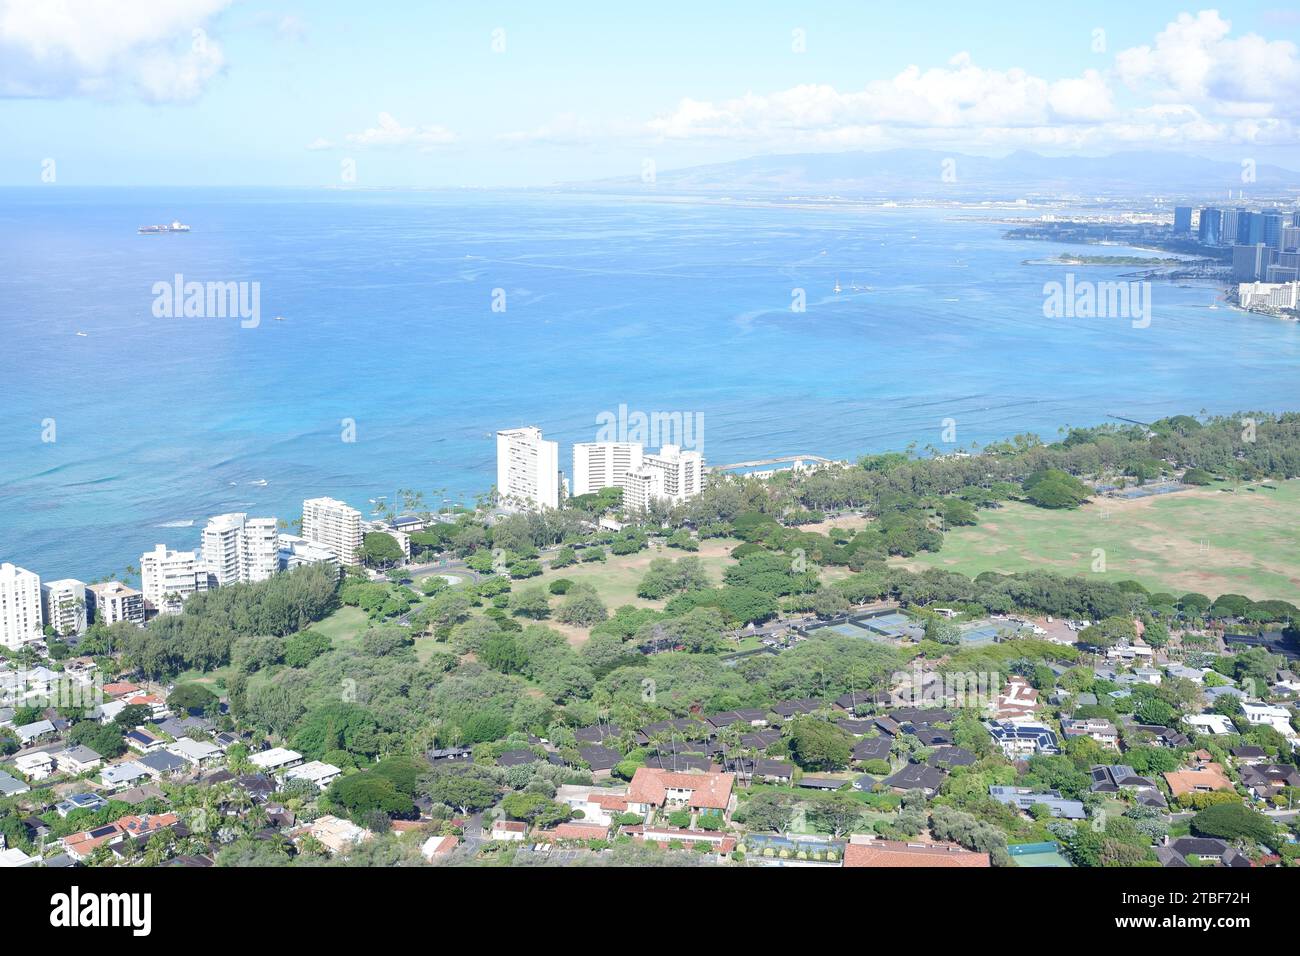 Photo of view of Waikiki District from Diamond Head crater in Honolulu County in the island of Oahu, Hawaii USA. Stock Photo